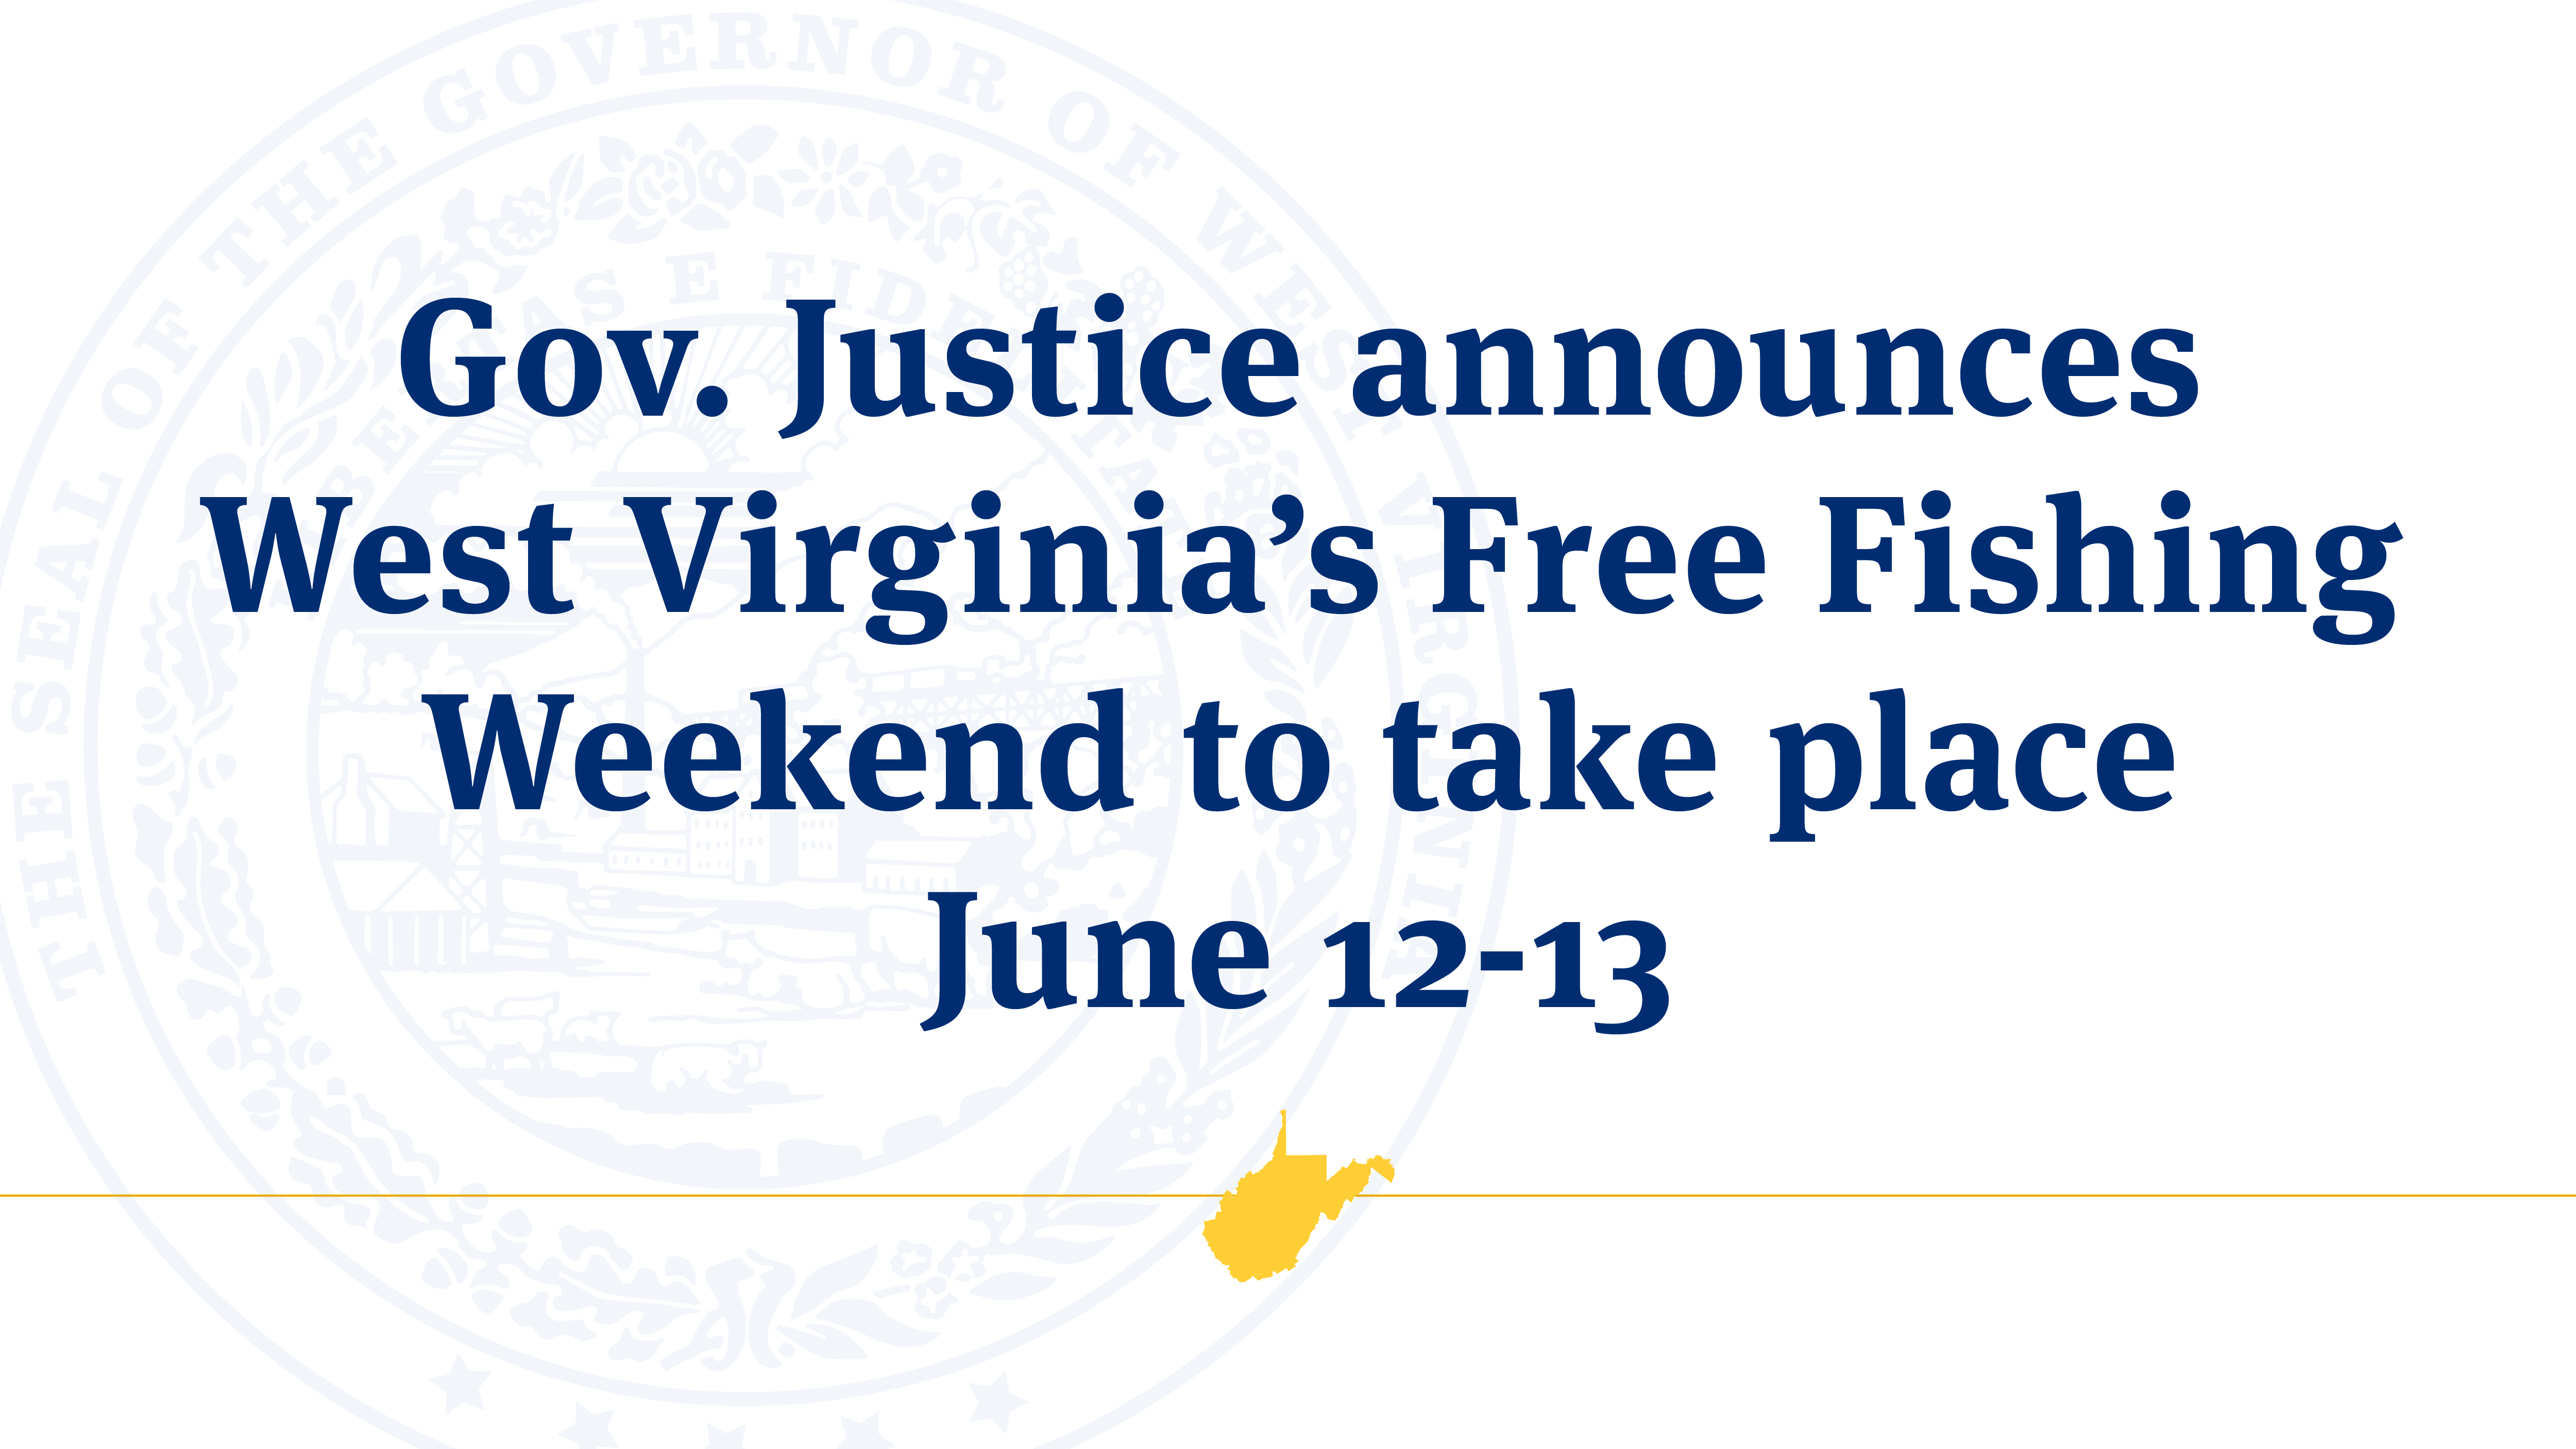 Gov. Justice announces West Virginia’s Free Fishing Weekend to take